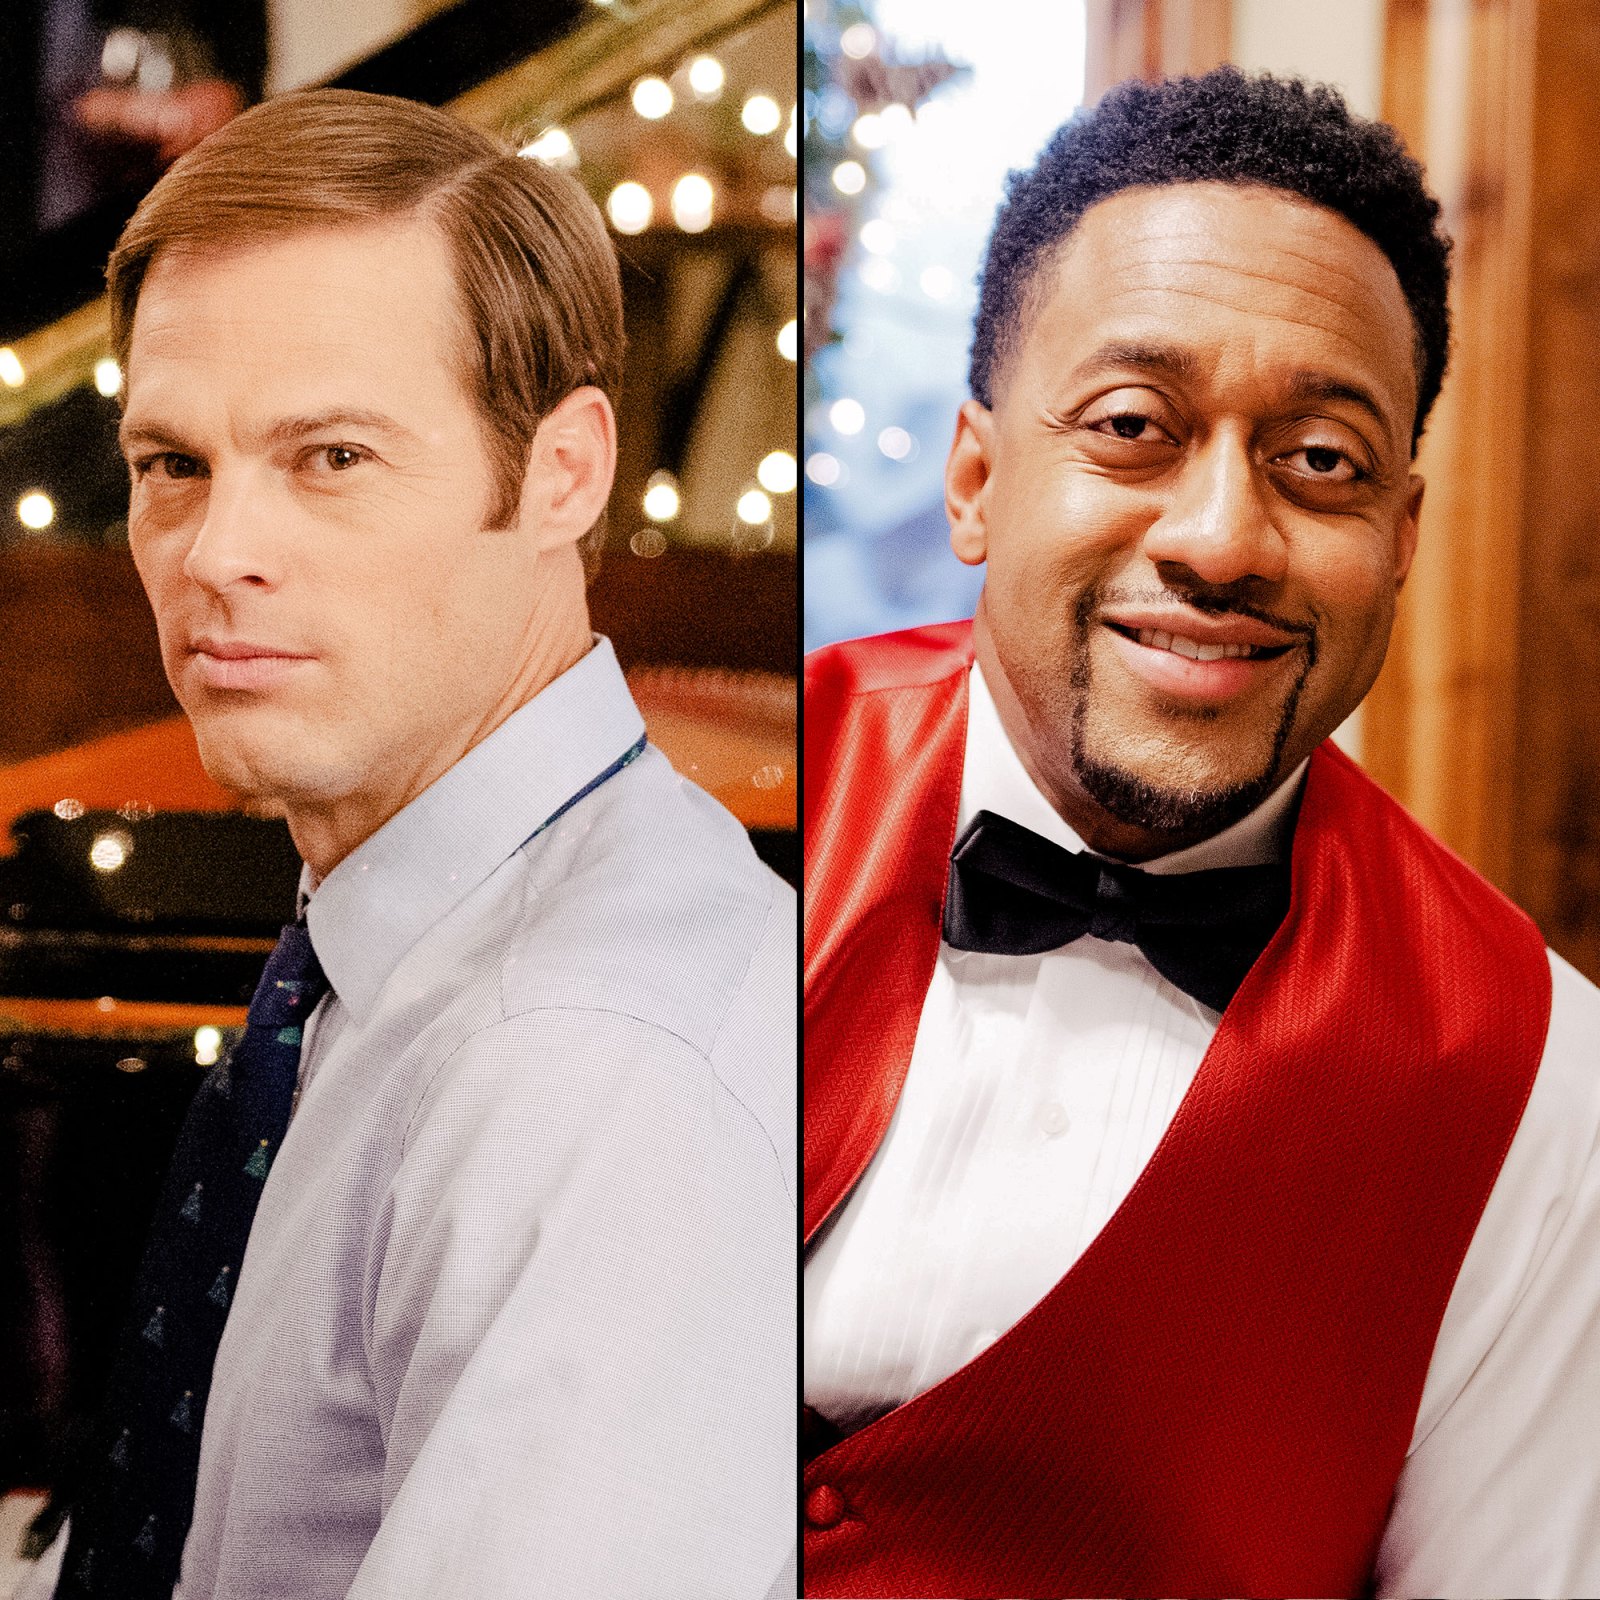 George Stults and Jaleel White Men to Watch on Lifetime This Season